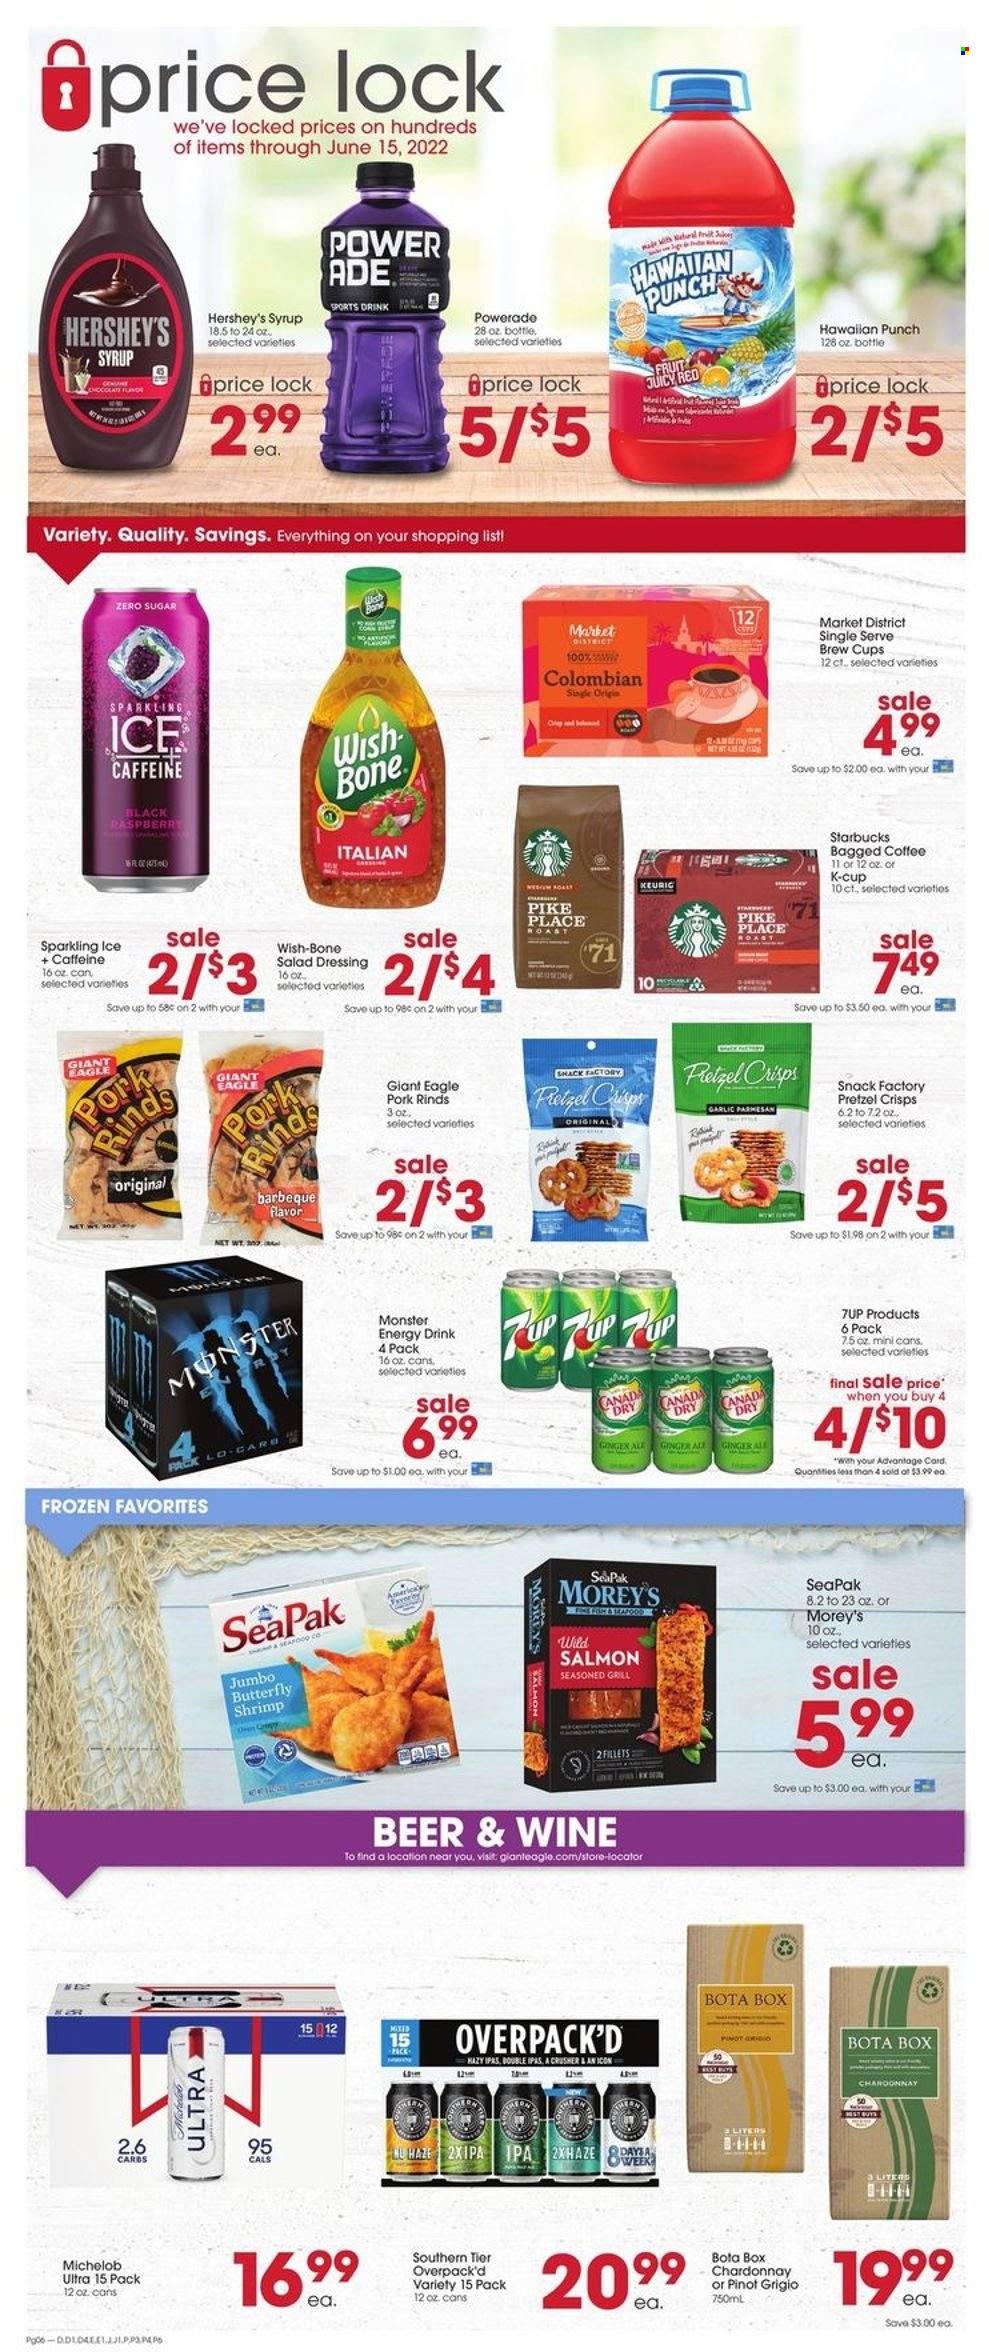 thumbnail - Giant Eagle Flyer - 05/19/2022 - 05/25/2022 - Sales products - salmon, shrimps, Hershey's, snack, pretzel crisps, salad dressing, dressing, syrup, ginger ale, Powerade, energy drink, 7UP, Monster Energy, Starbucks, coffee capsules, K-Cups, white wine, Chardonnay, wine, Pinot Grigio, beer, IPA, Michelob. Page 5.